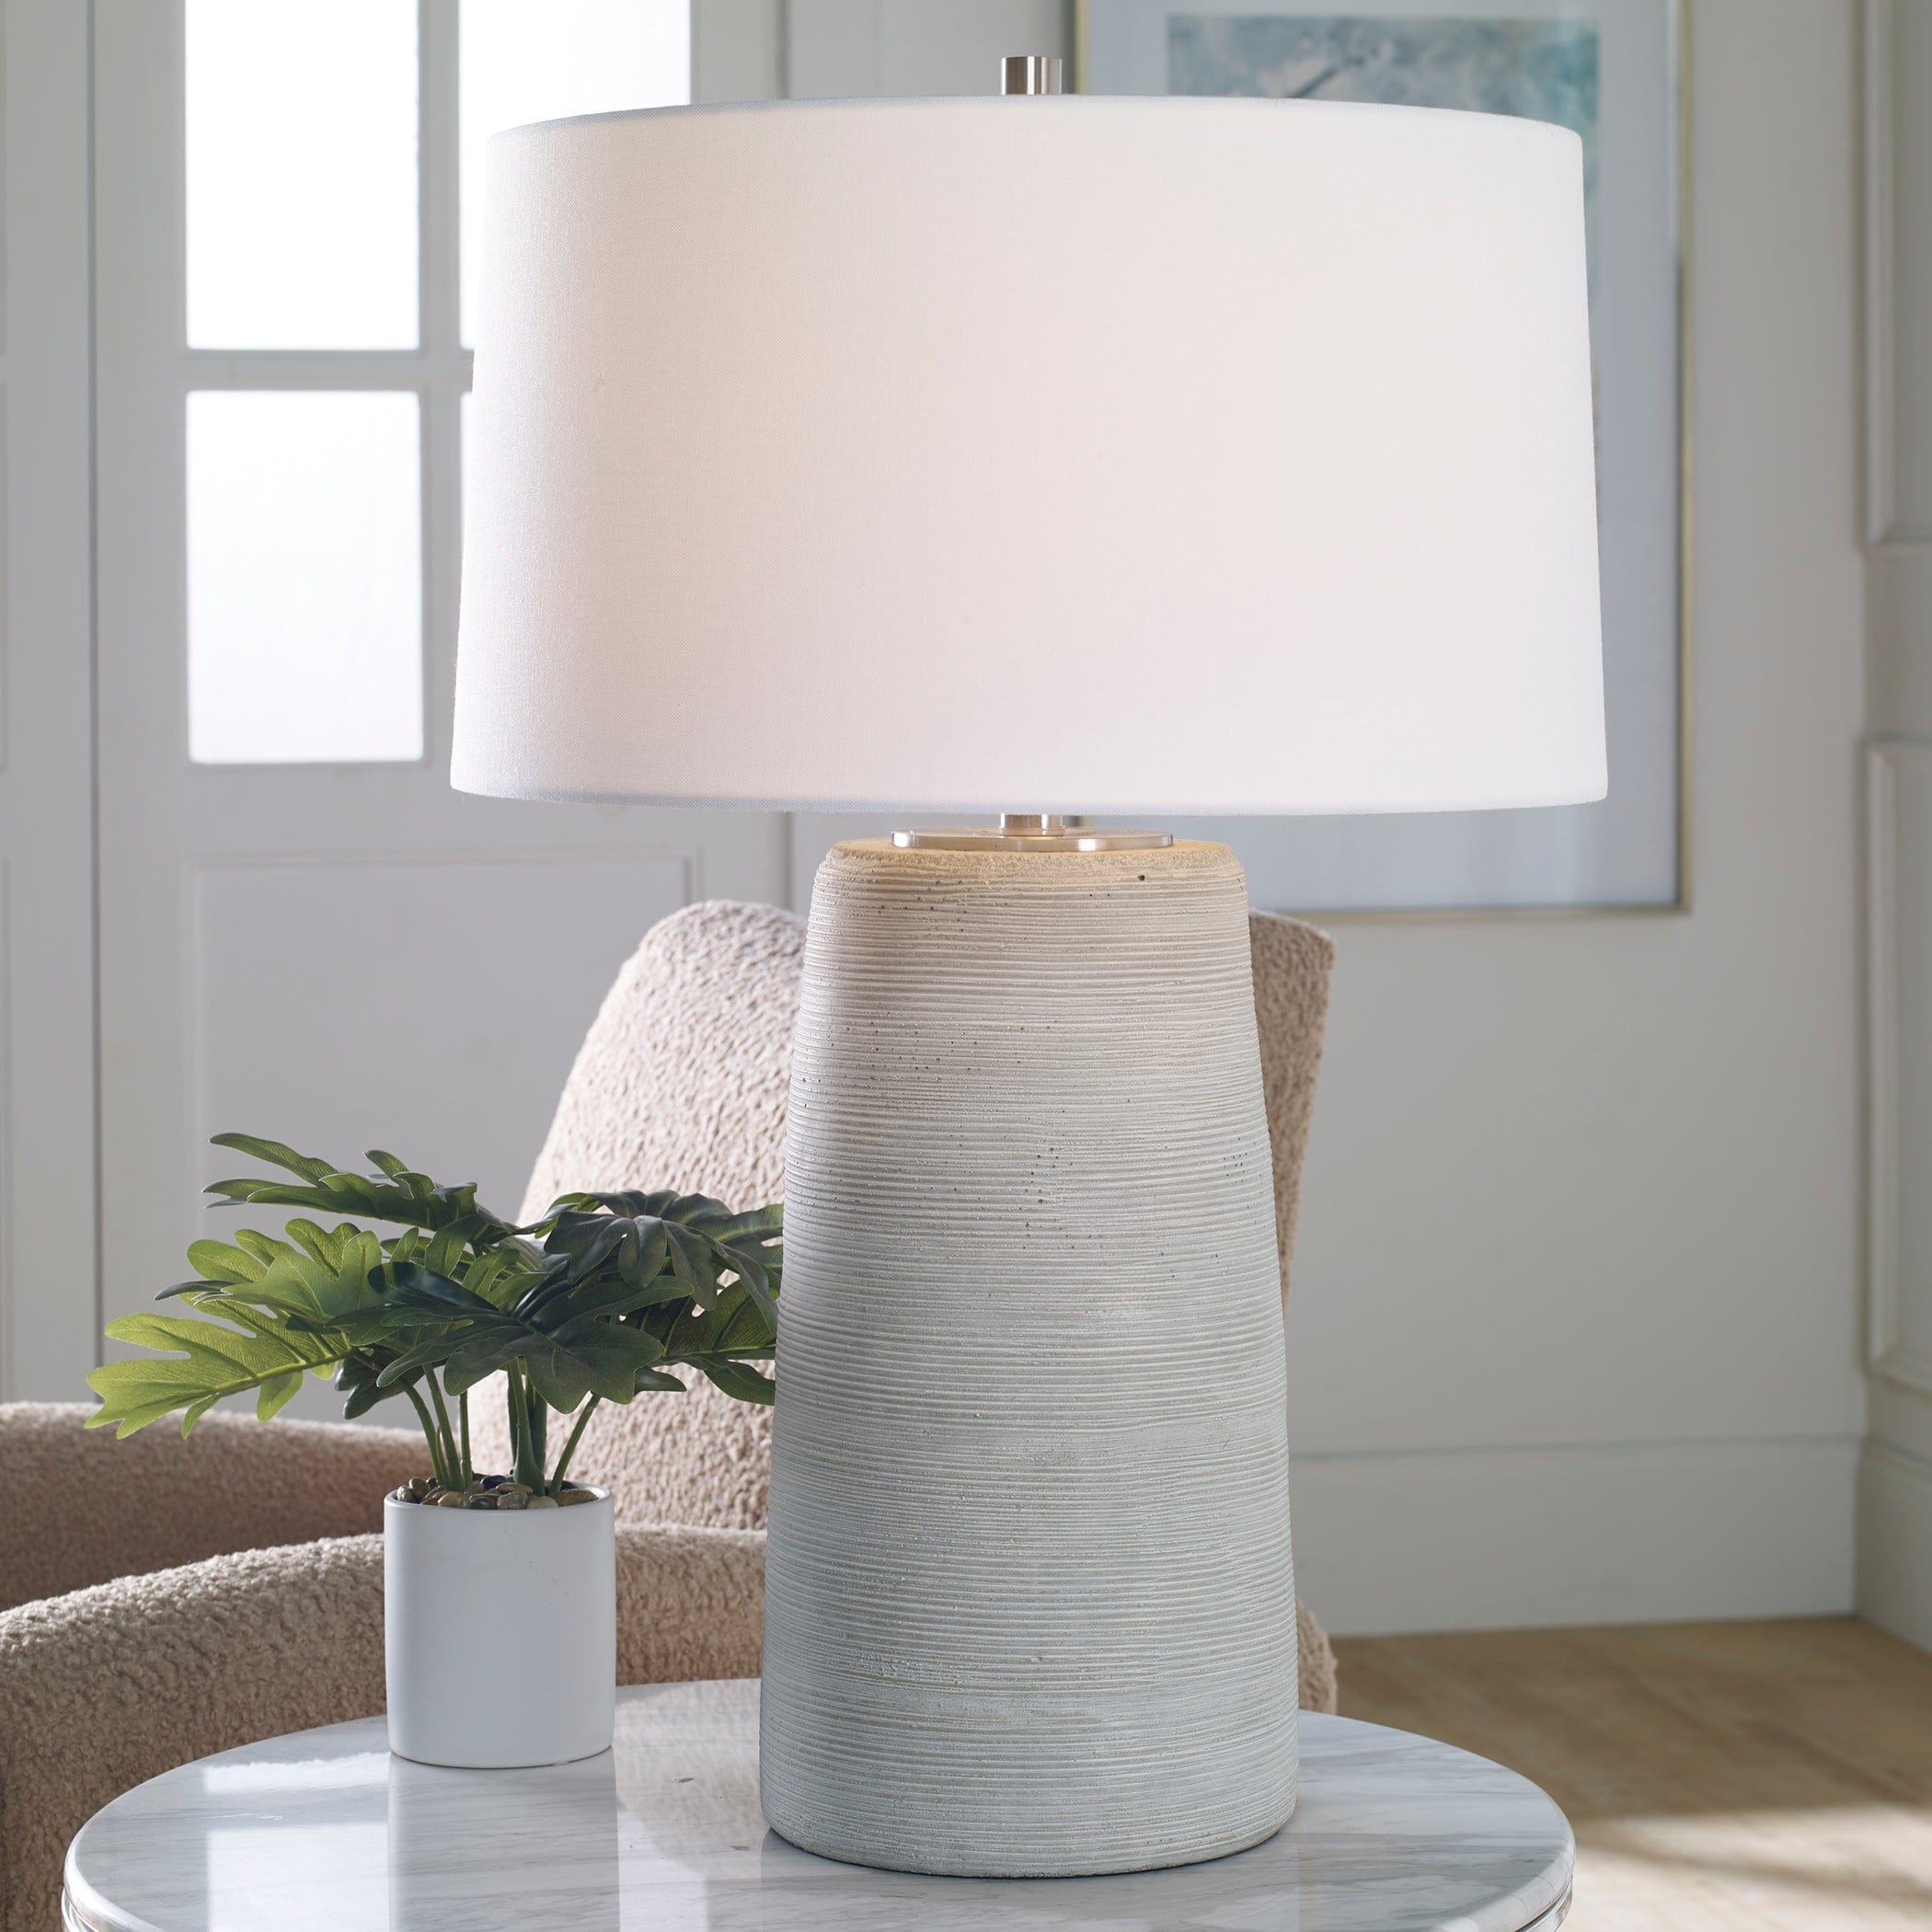 Mountainscape Ceramic Table Lamp Uttermost